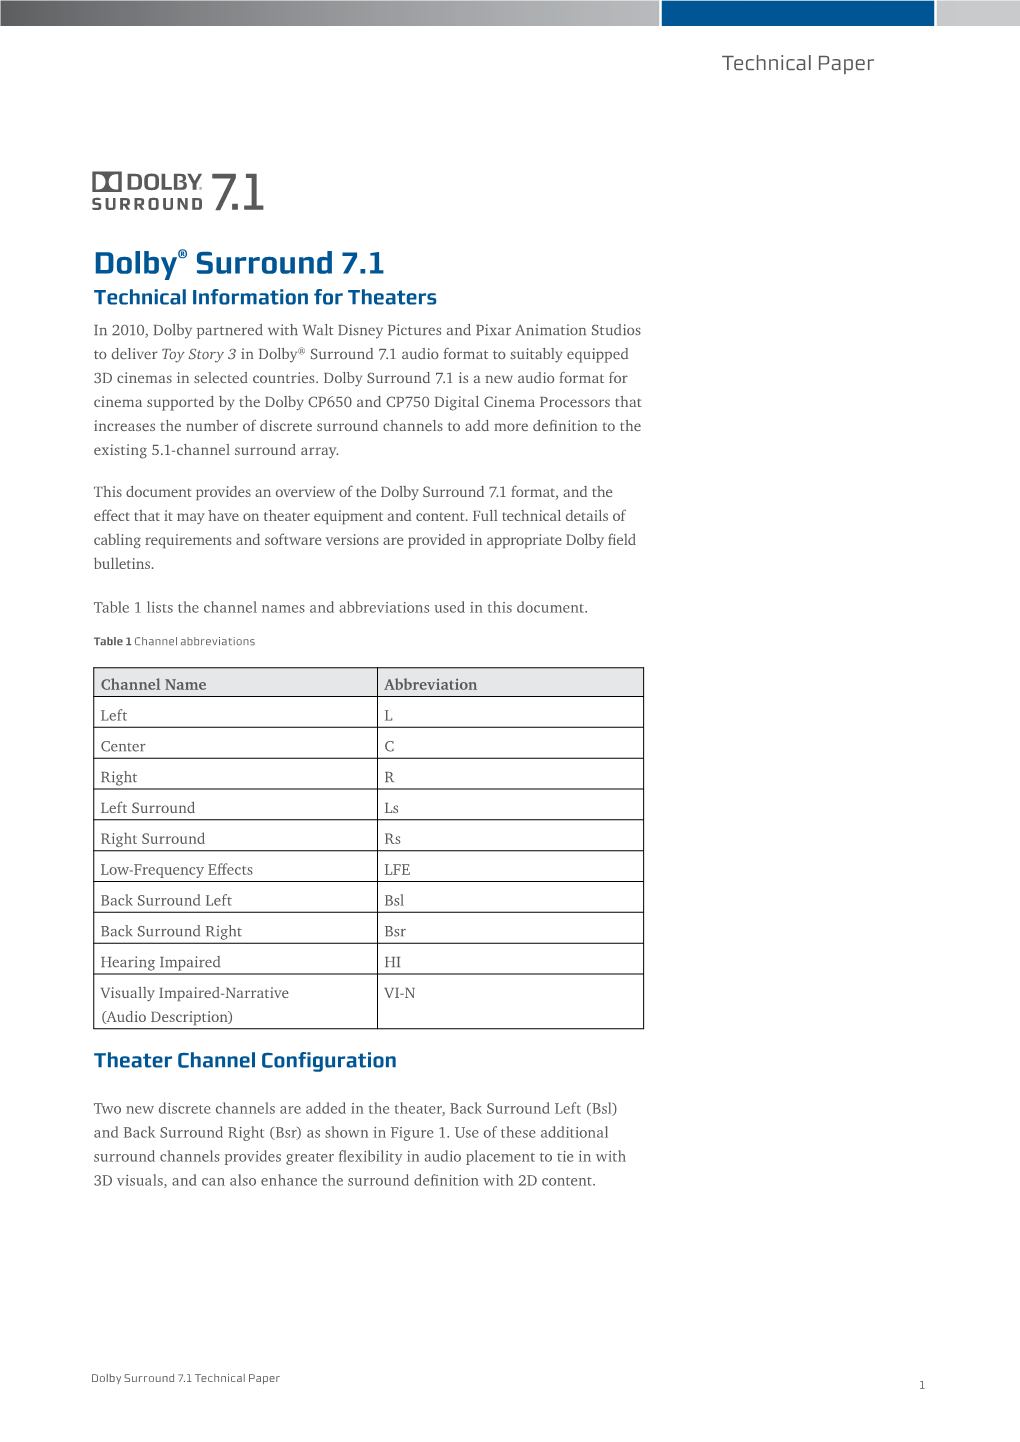 Dolby Surround 7.1: Technical Information for Theaters